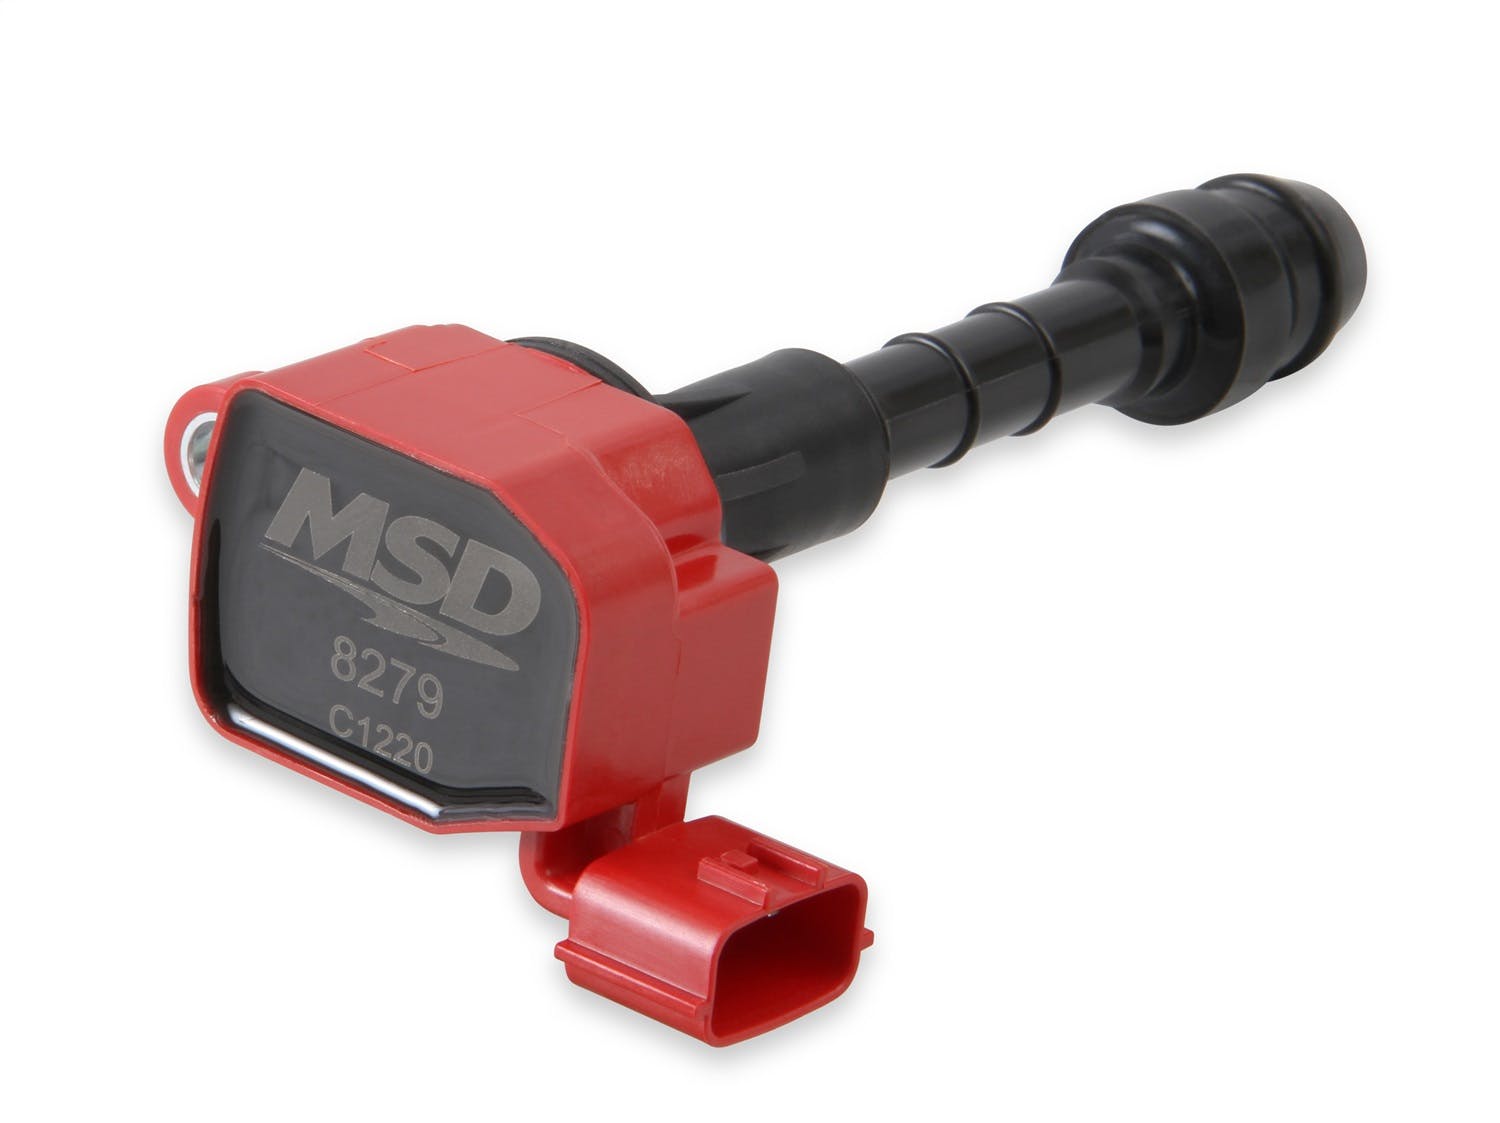 MSD Performance 8279 Blaster Direct Ignition Coil